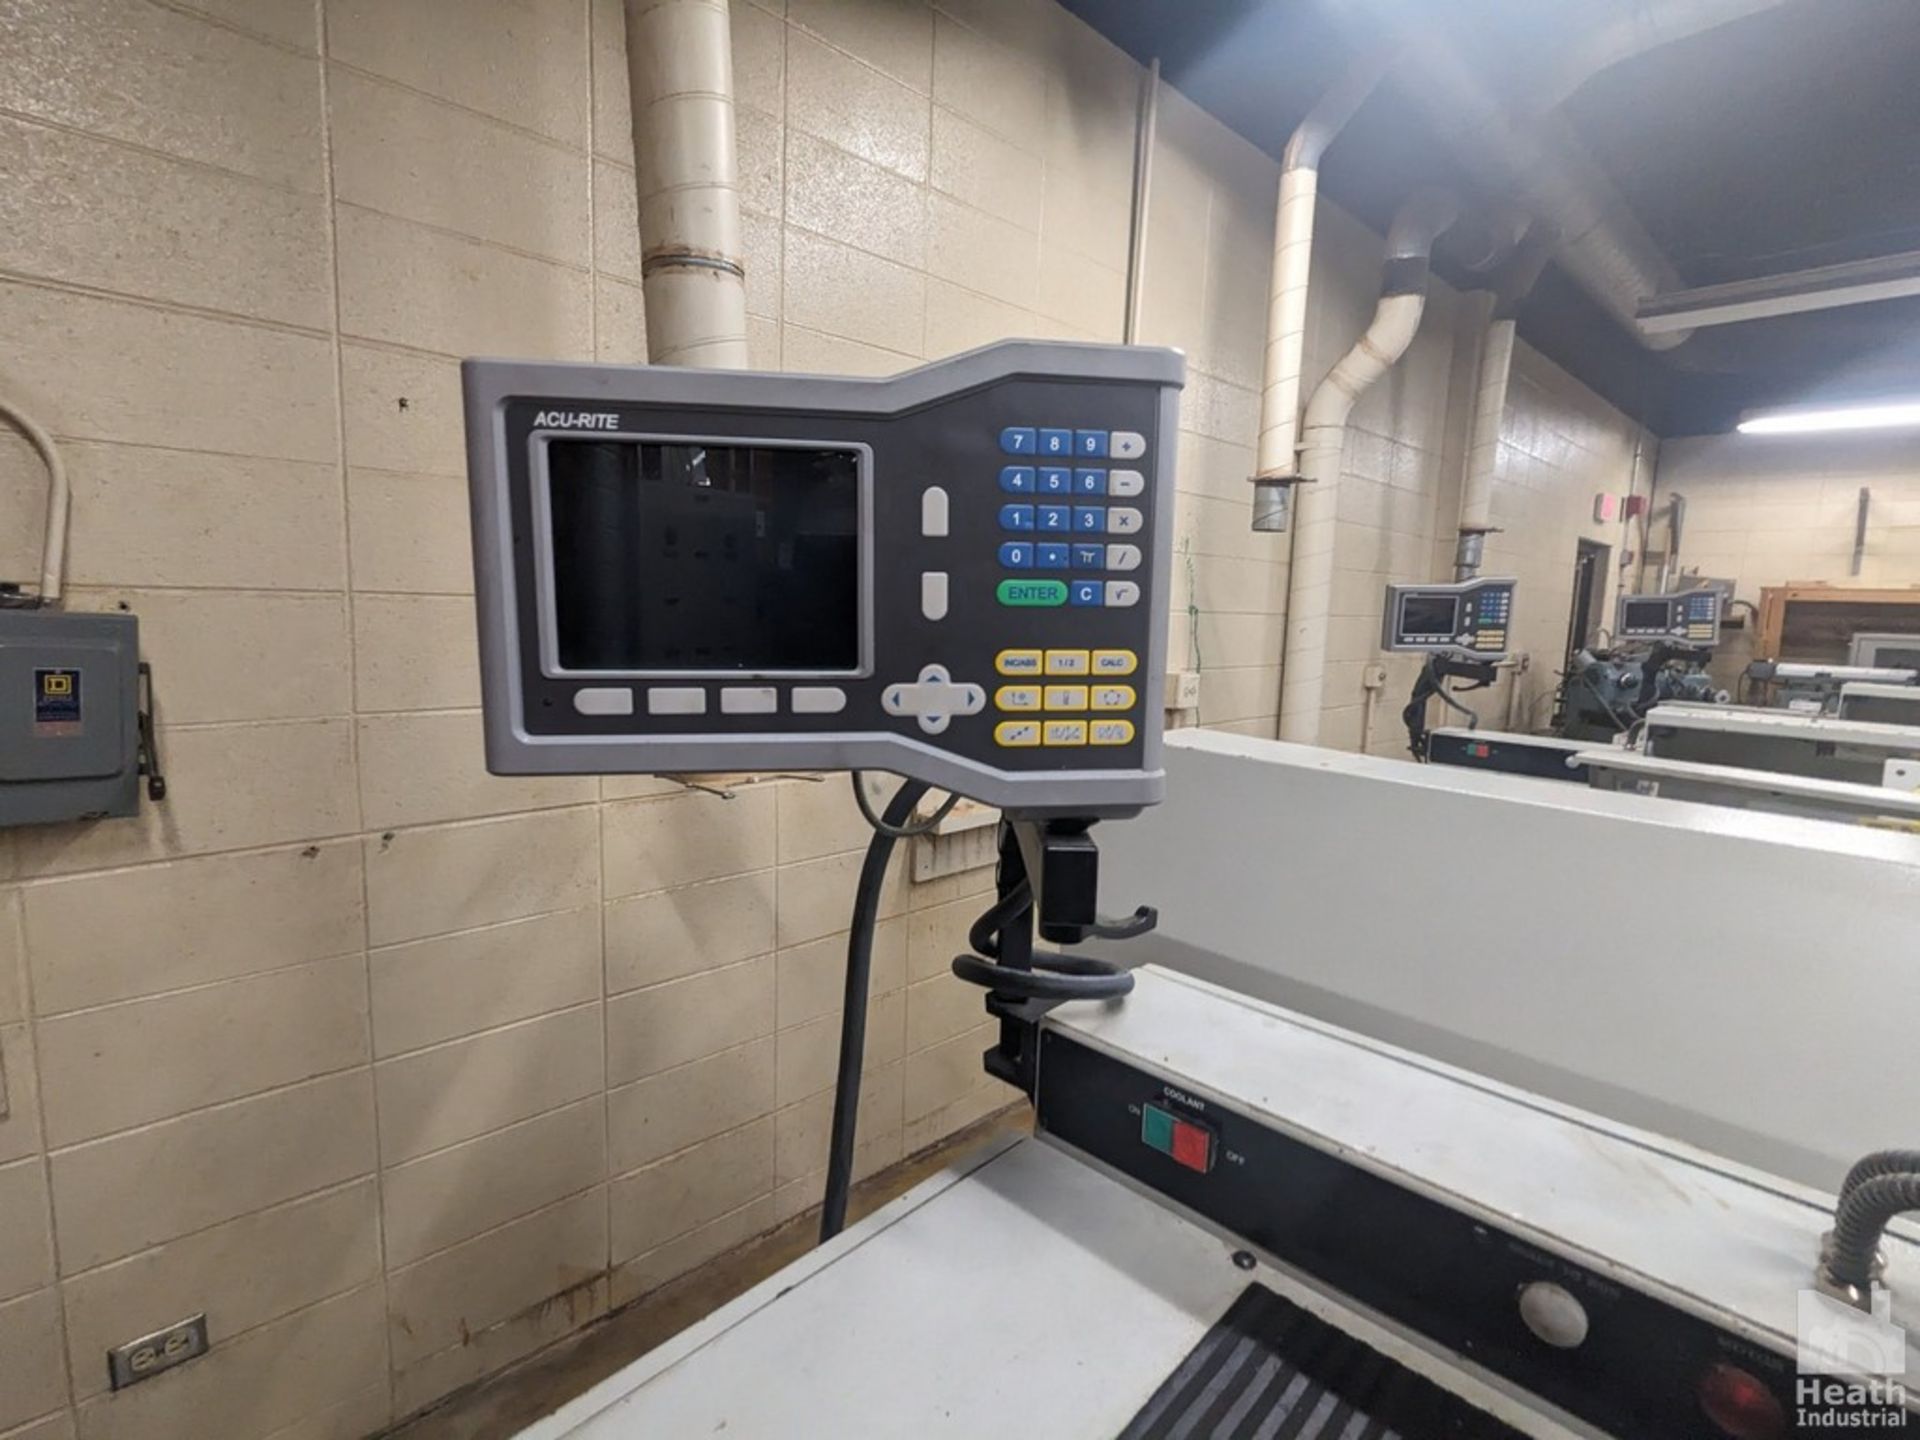 CLAUSING-METOSA 13"X40" MODEL 1340S TOOLROOM LATHE, S/N 50002, 2500 SPINDLE RPM, WITH 6" 3-JAW - Image 2 of 7